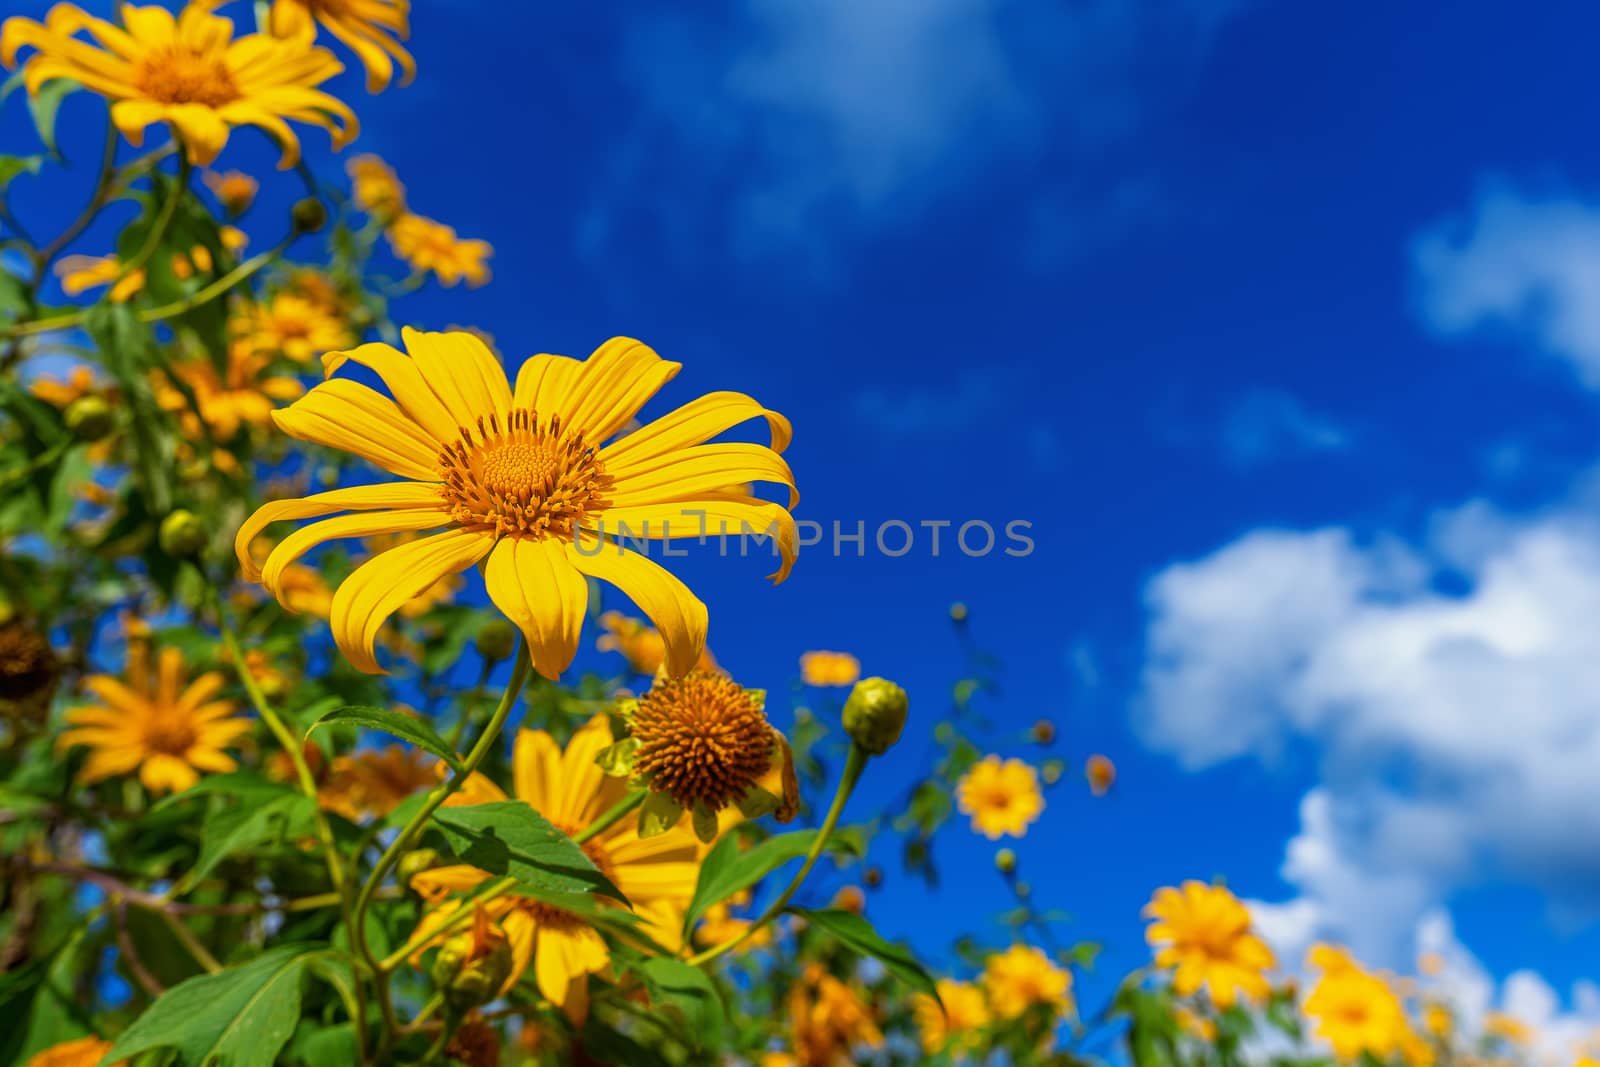 Tree marigold or Mexican flower blooming and blue sky.